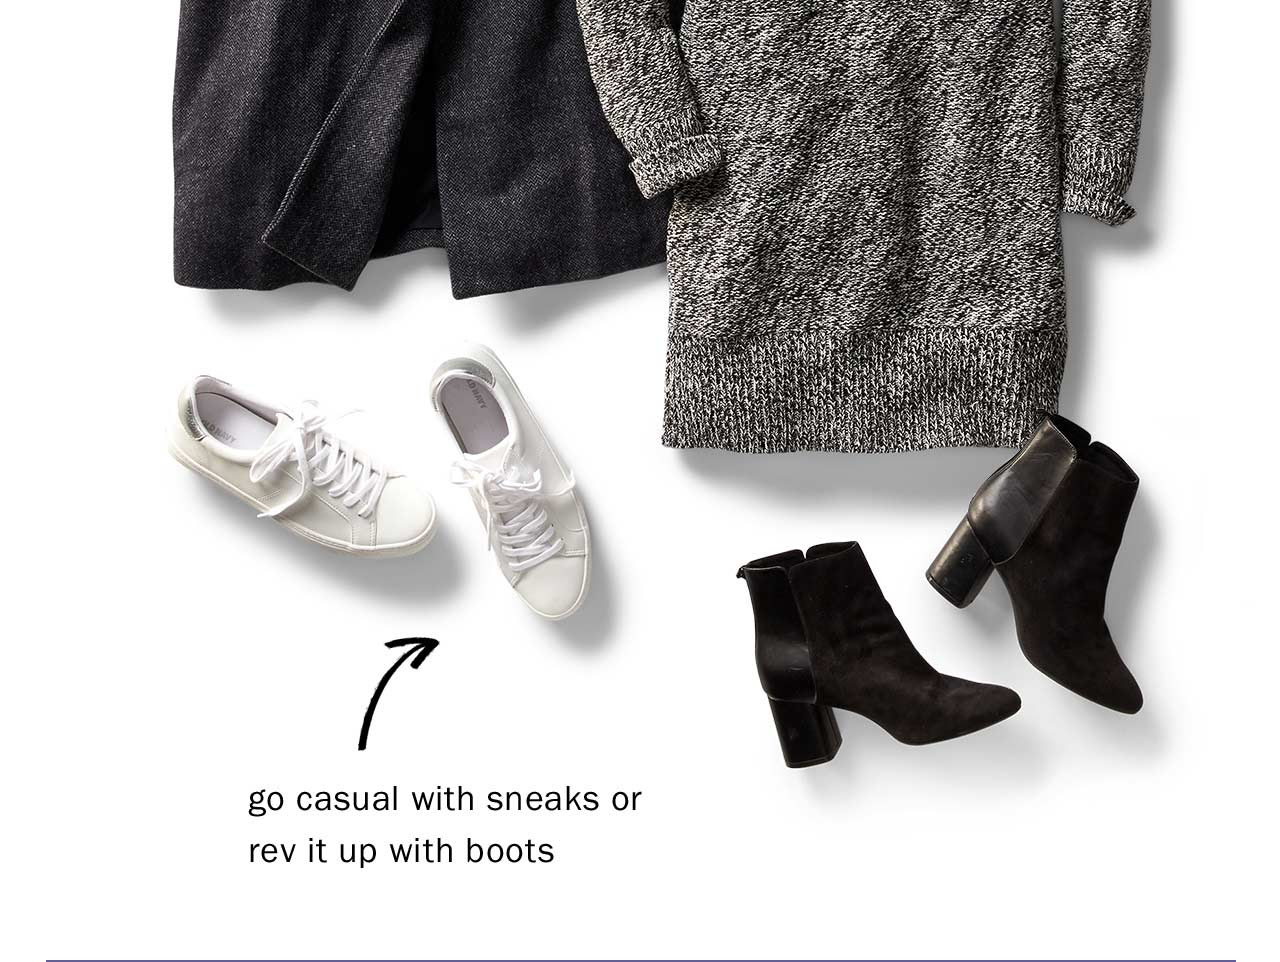 GO CASUAL WITH SNEAKS OR REV IT UP WITH BOOTS